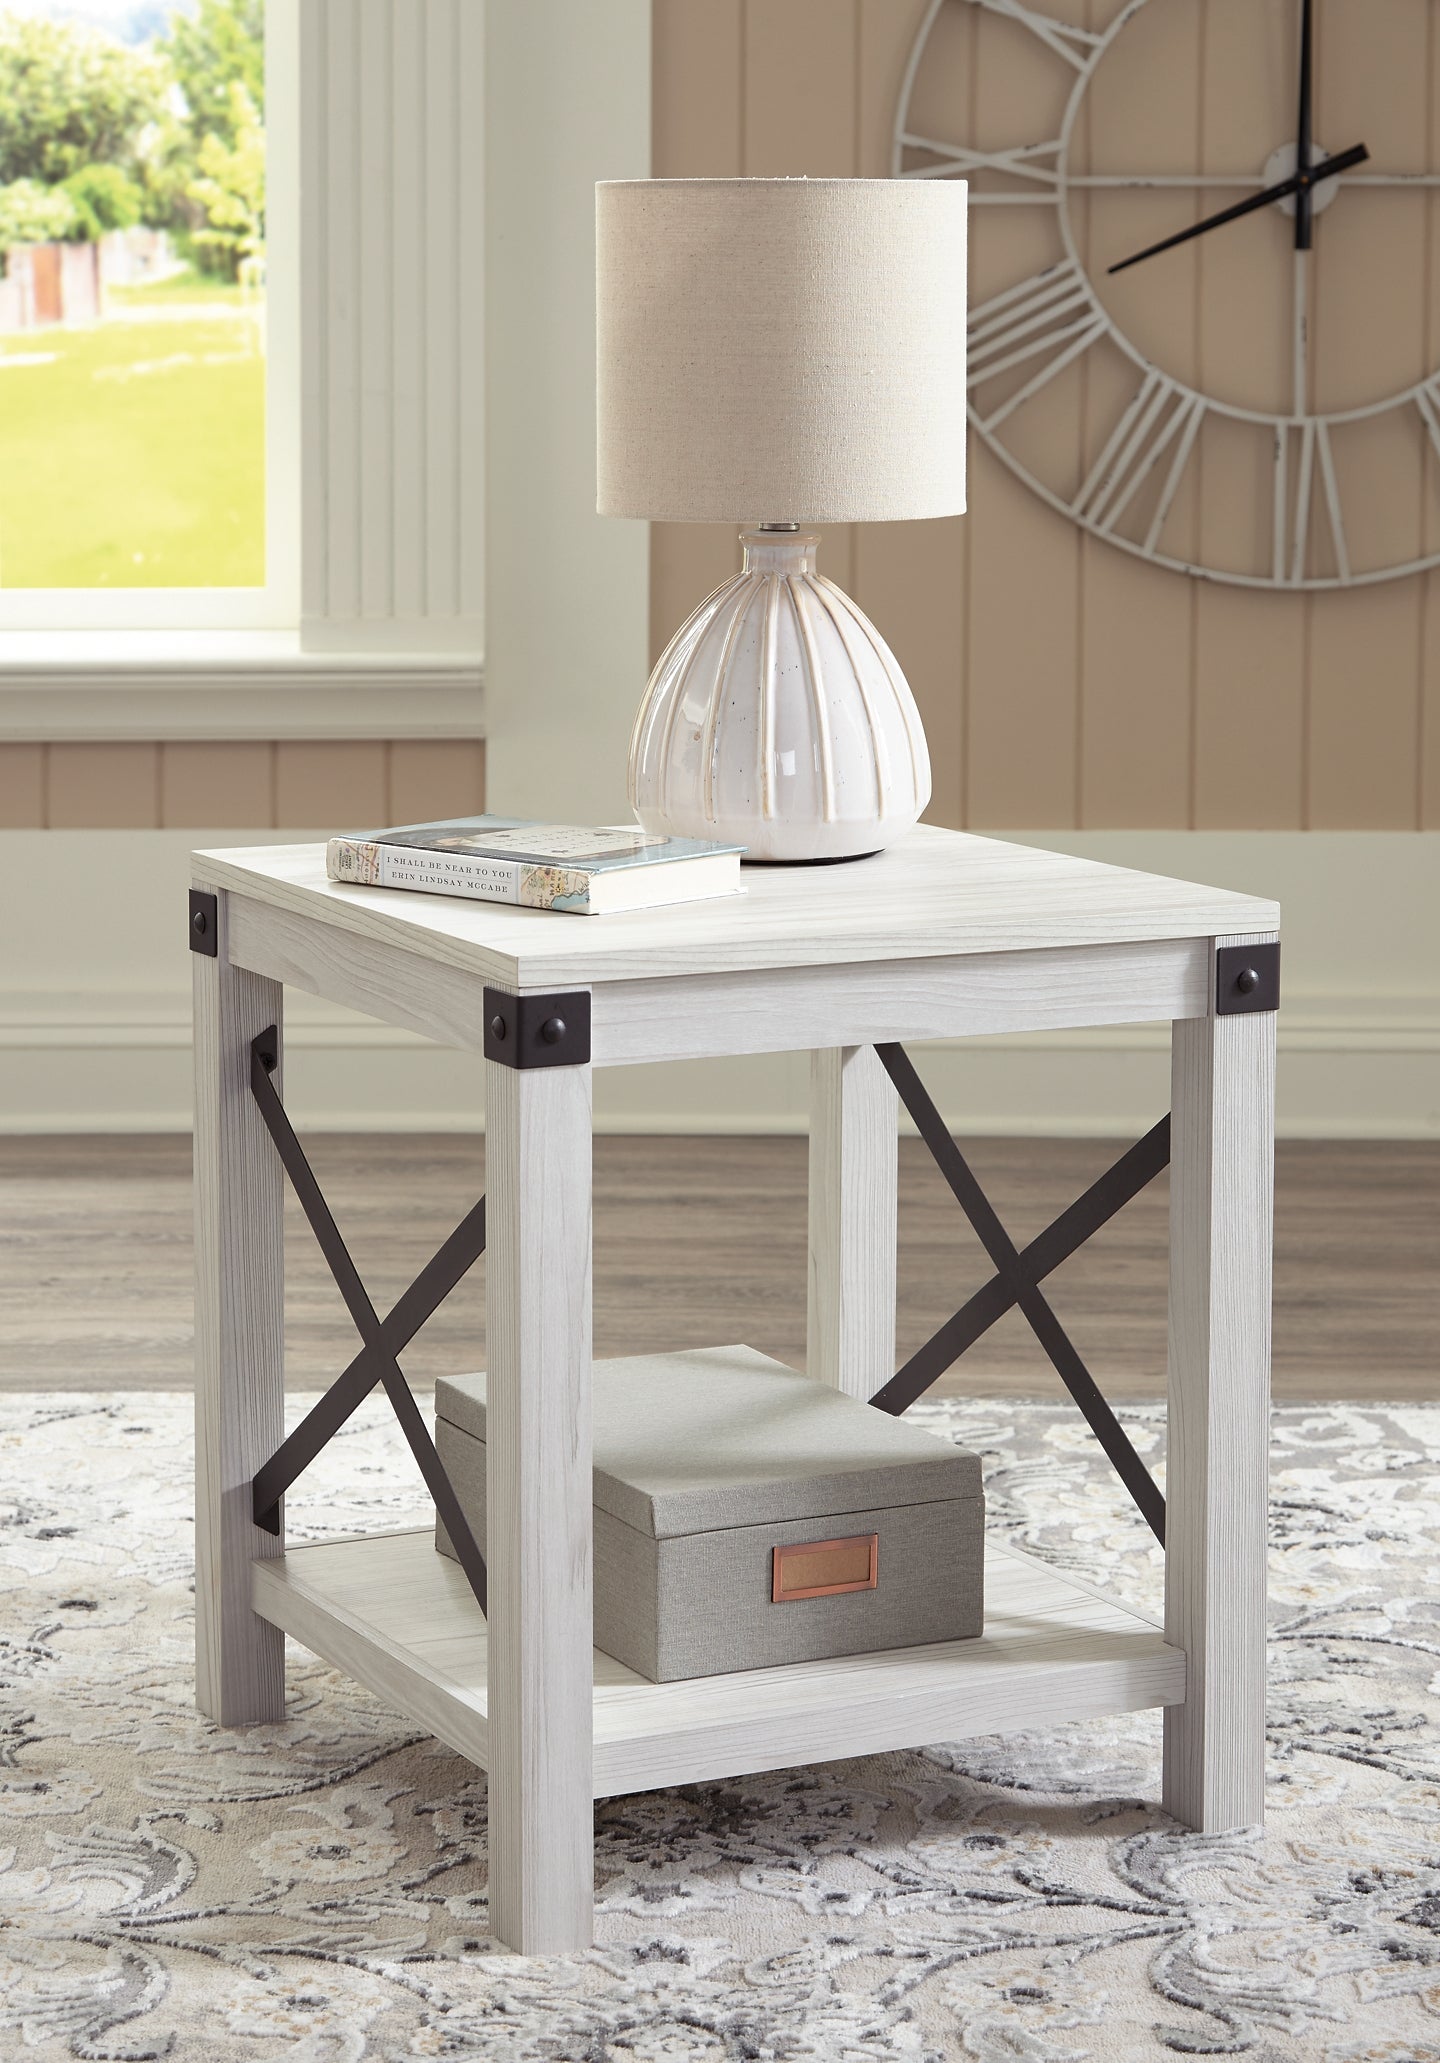 Bayflynn 2 End Tables Rent Wise Rent To Own Jacksonville, Florida